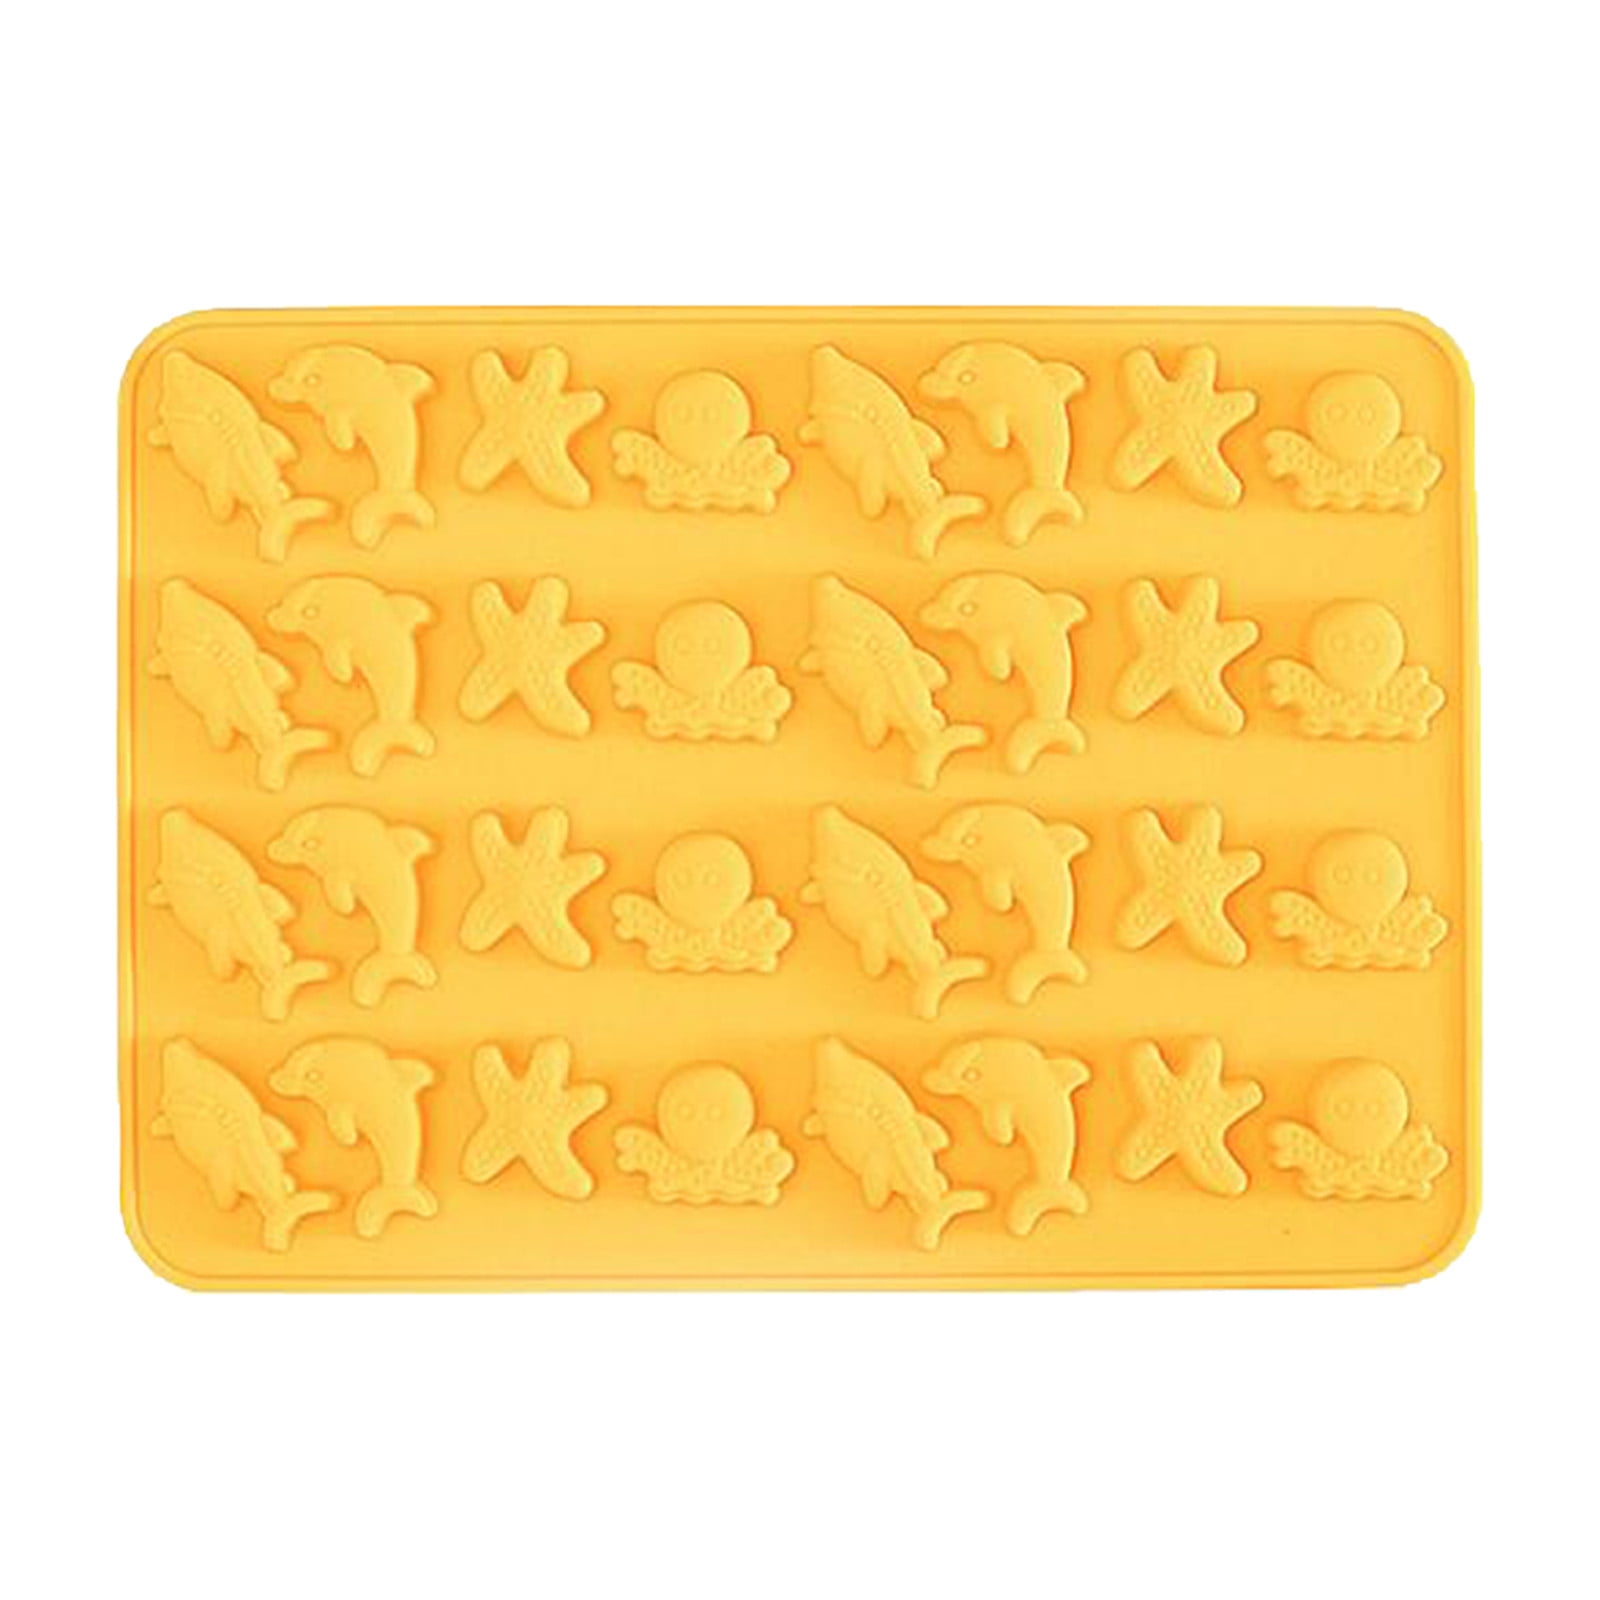 2Pcs Dinosaur Silicone Molds Food Grade Silicone Chocolate Molds, DIY QQ  Fudge Mold Non-Stick Candy Mold for Cupcake Decor